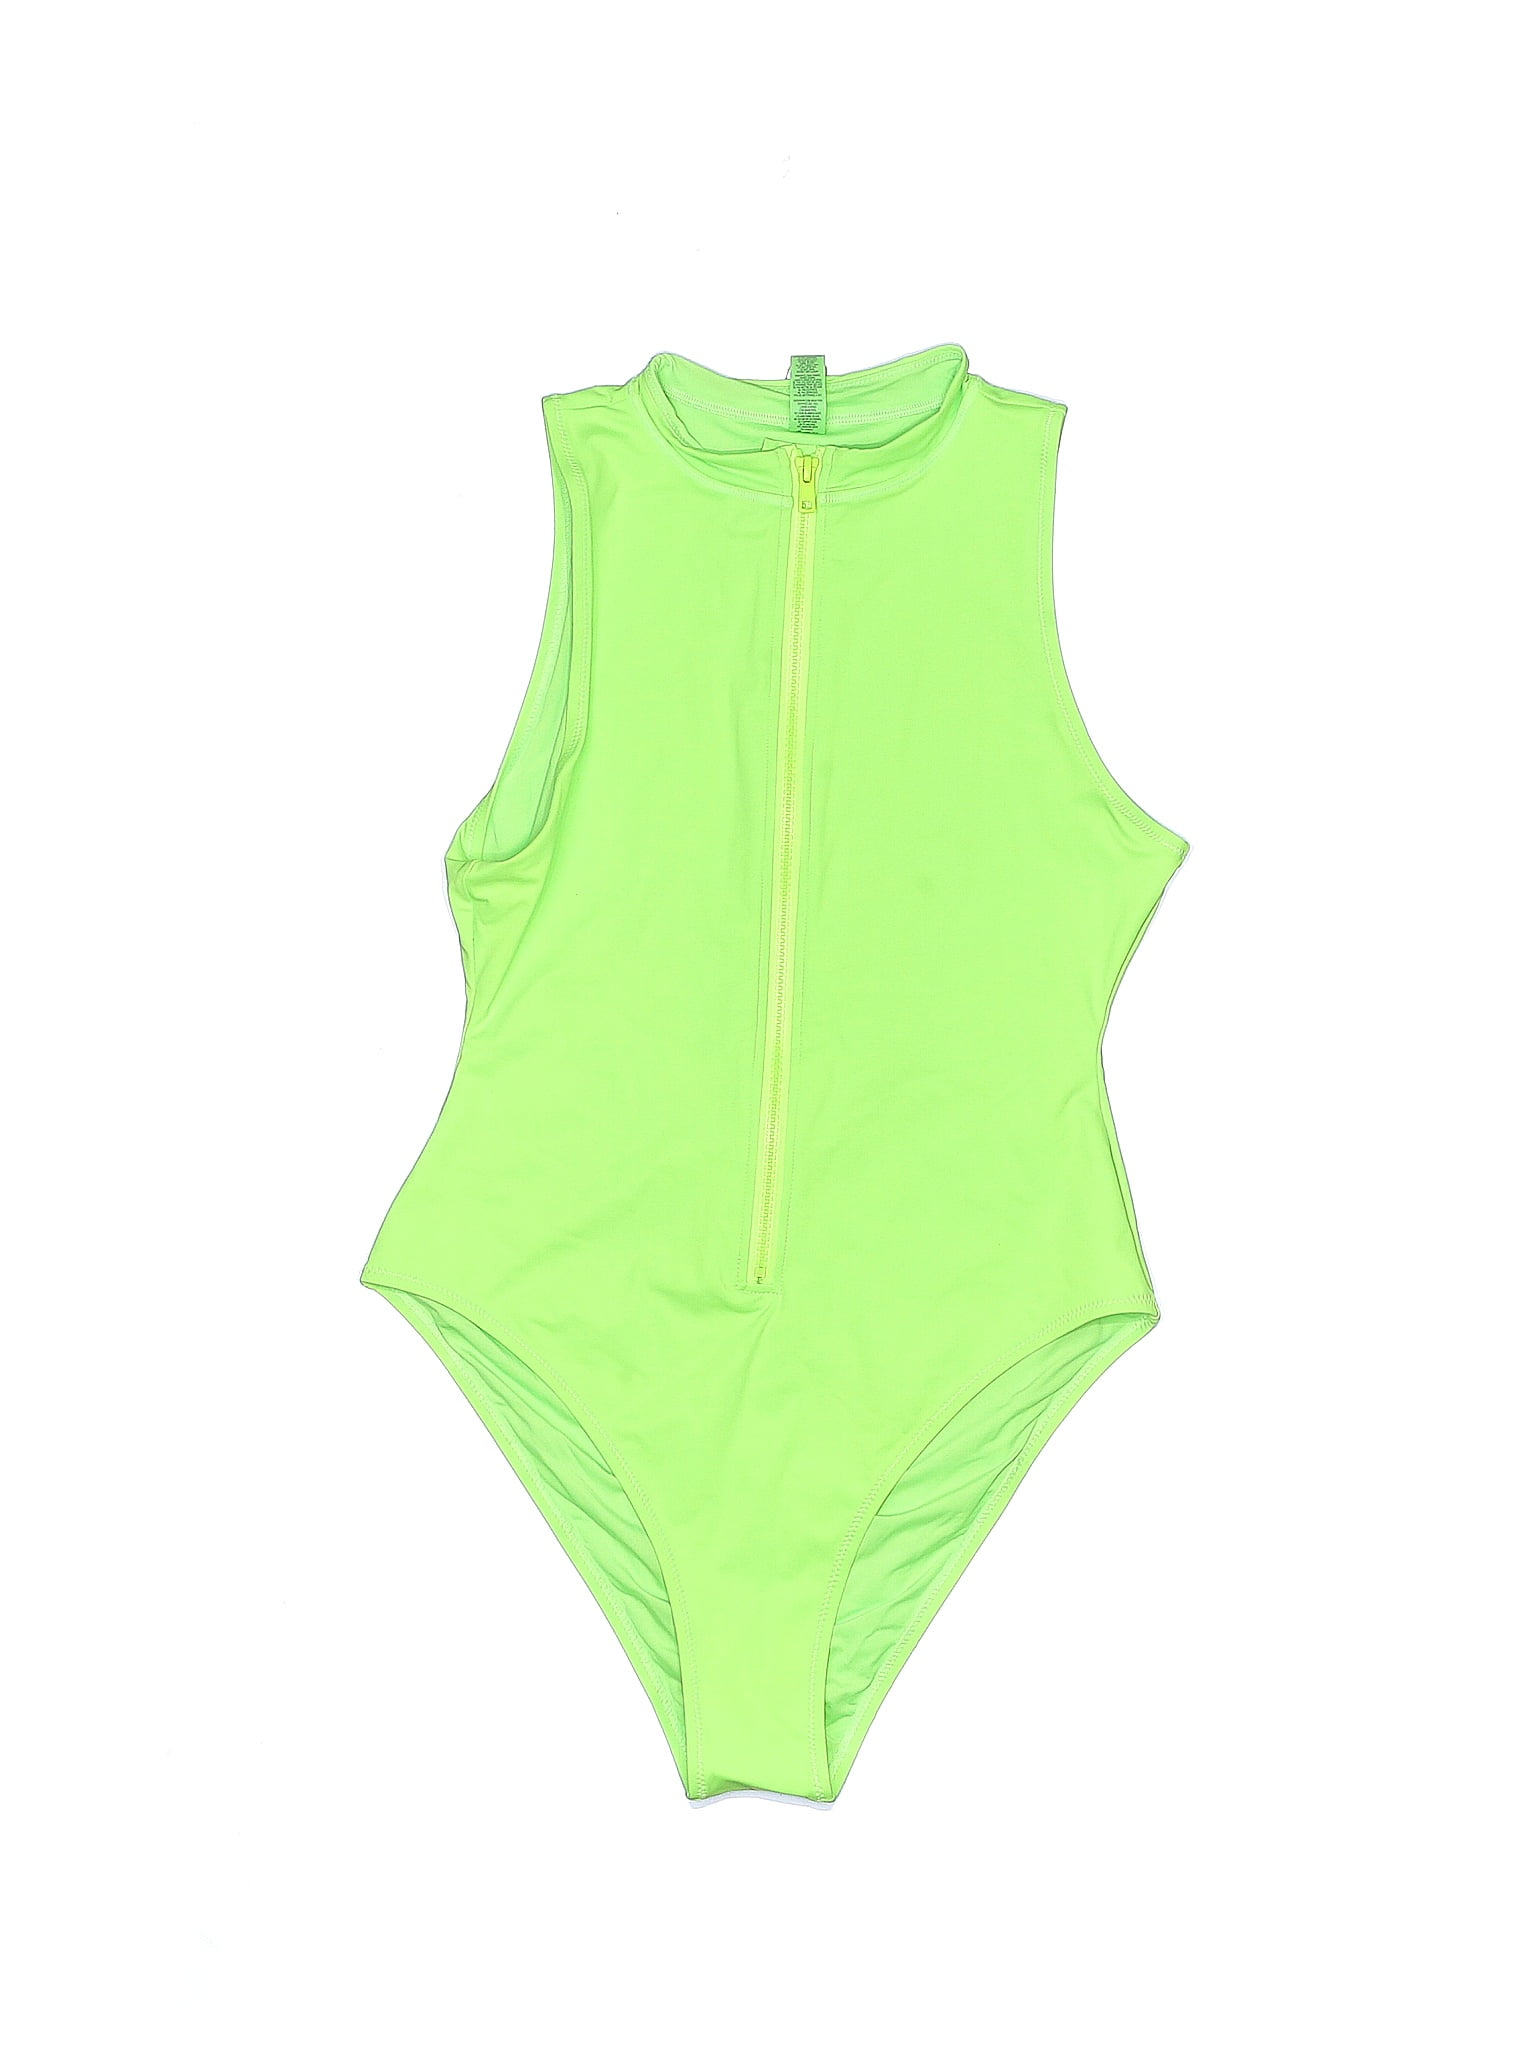 Skins Green One Piece Swimsuit Size L - 76% off | thredUP